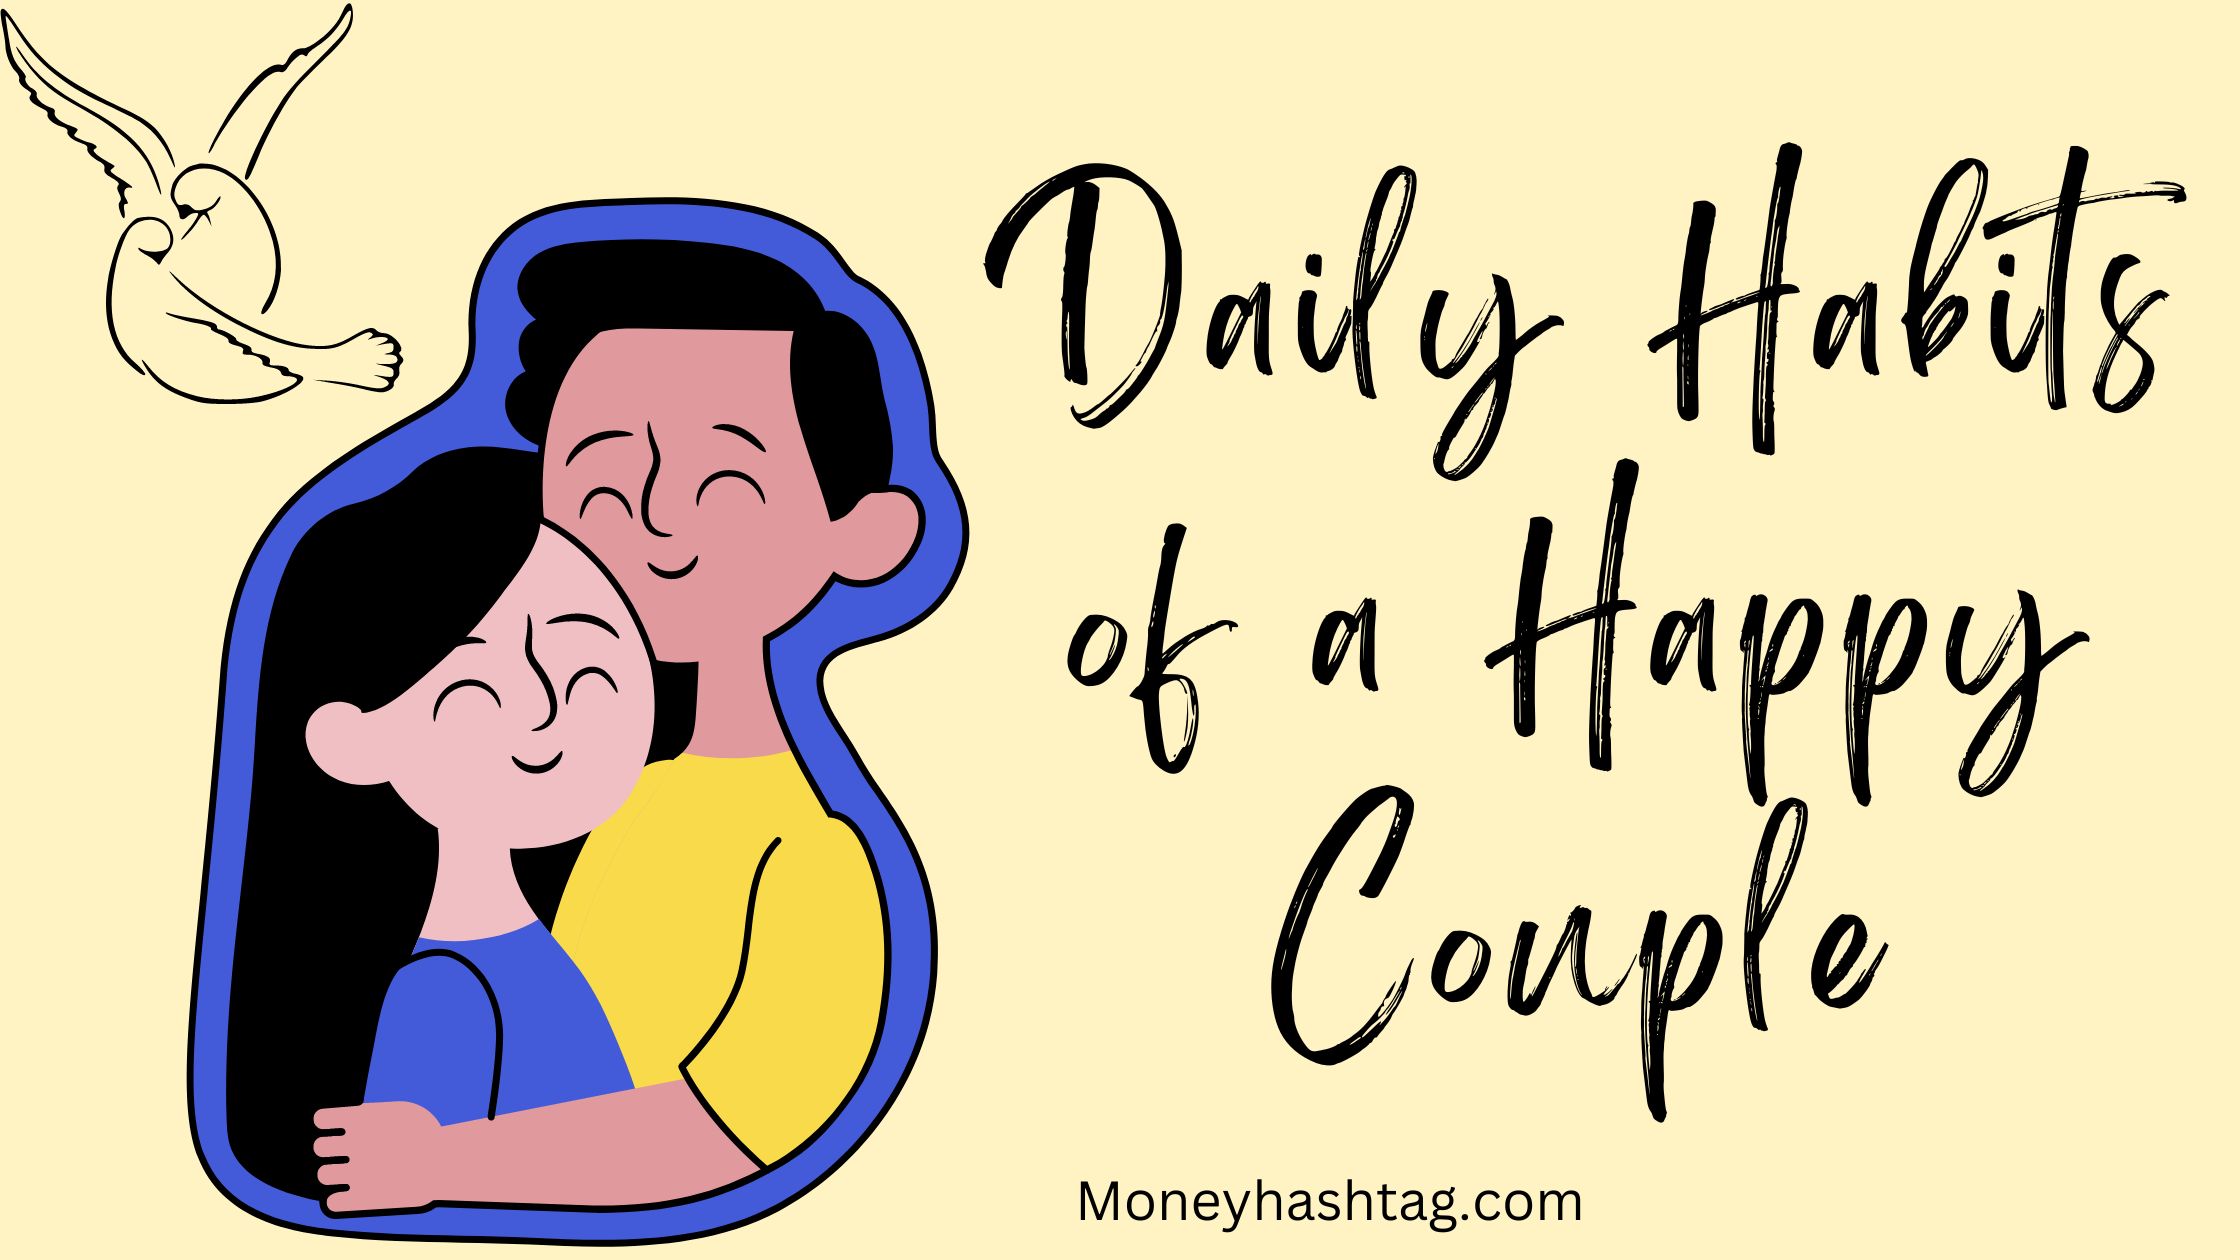 21 Daily Habits of a Happy Couple: How to be happier every day 3